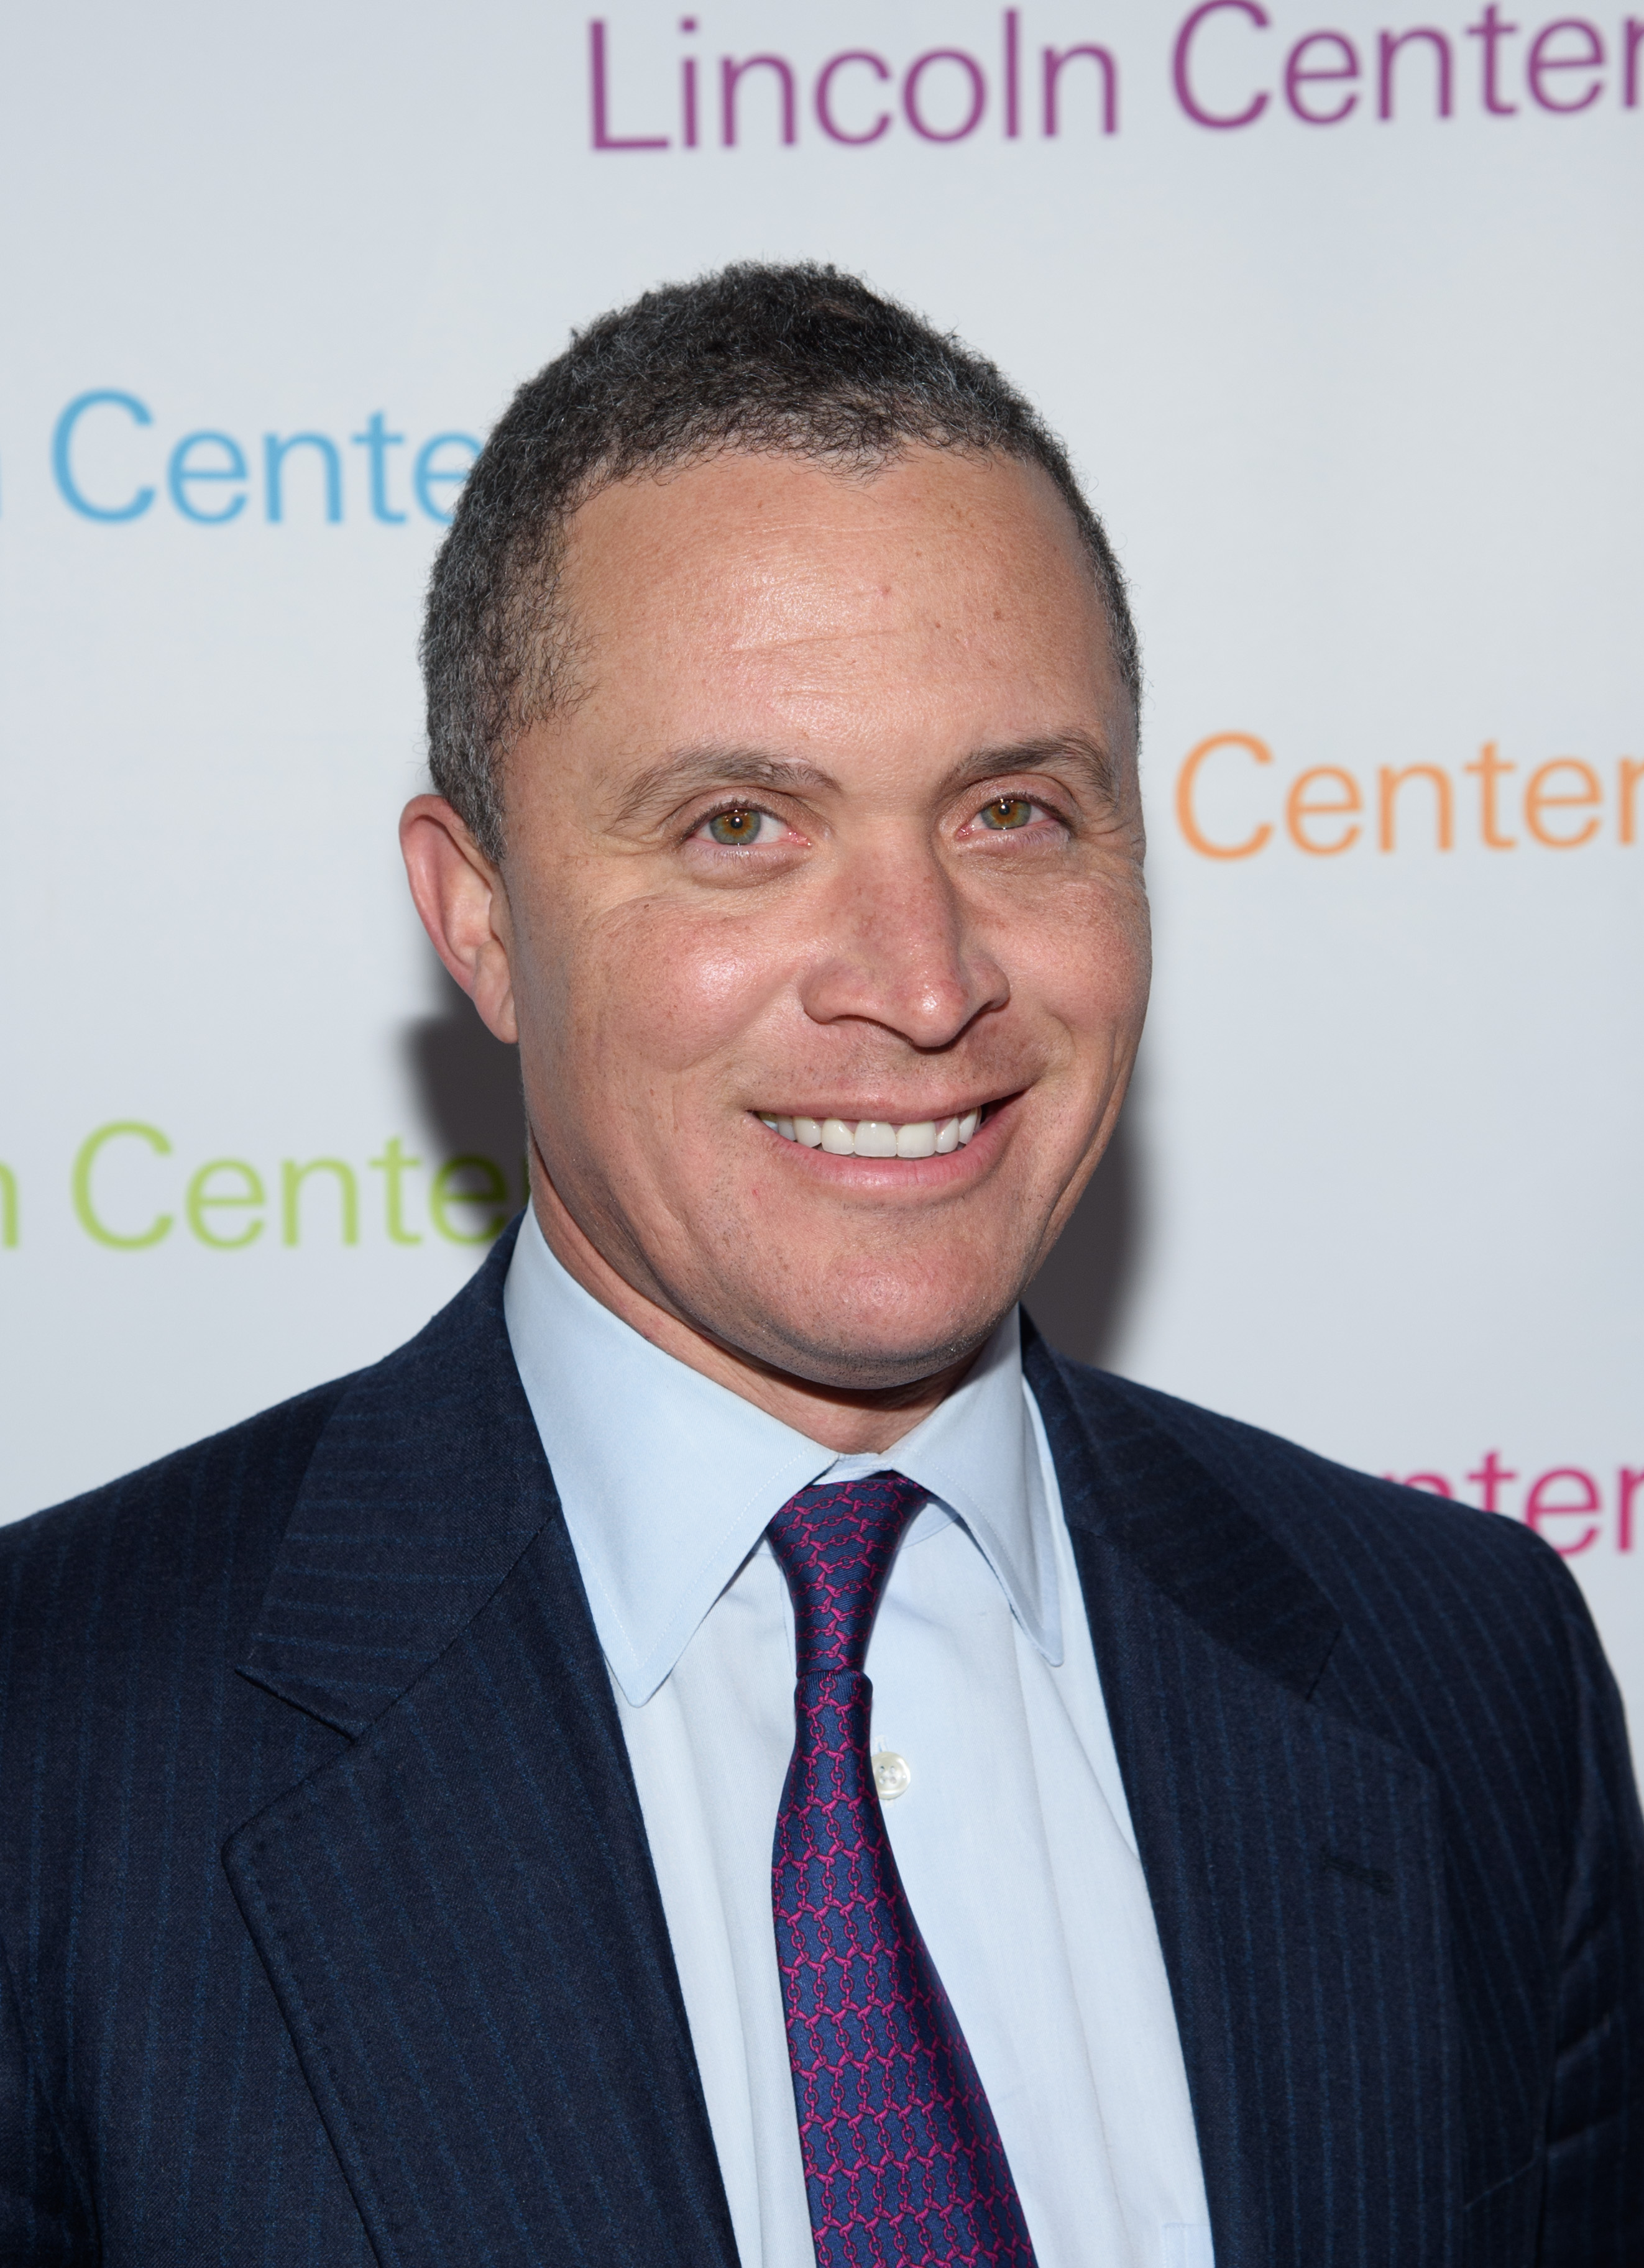 Harold Ford Jr. arrives at a gala at Lincoln Center on February 11, 2016 in New York City. (Dave Kotinsky—Getty Images)